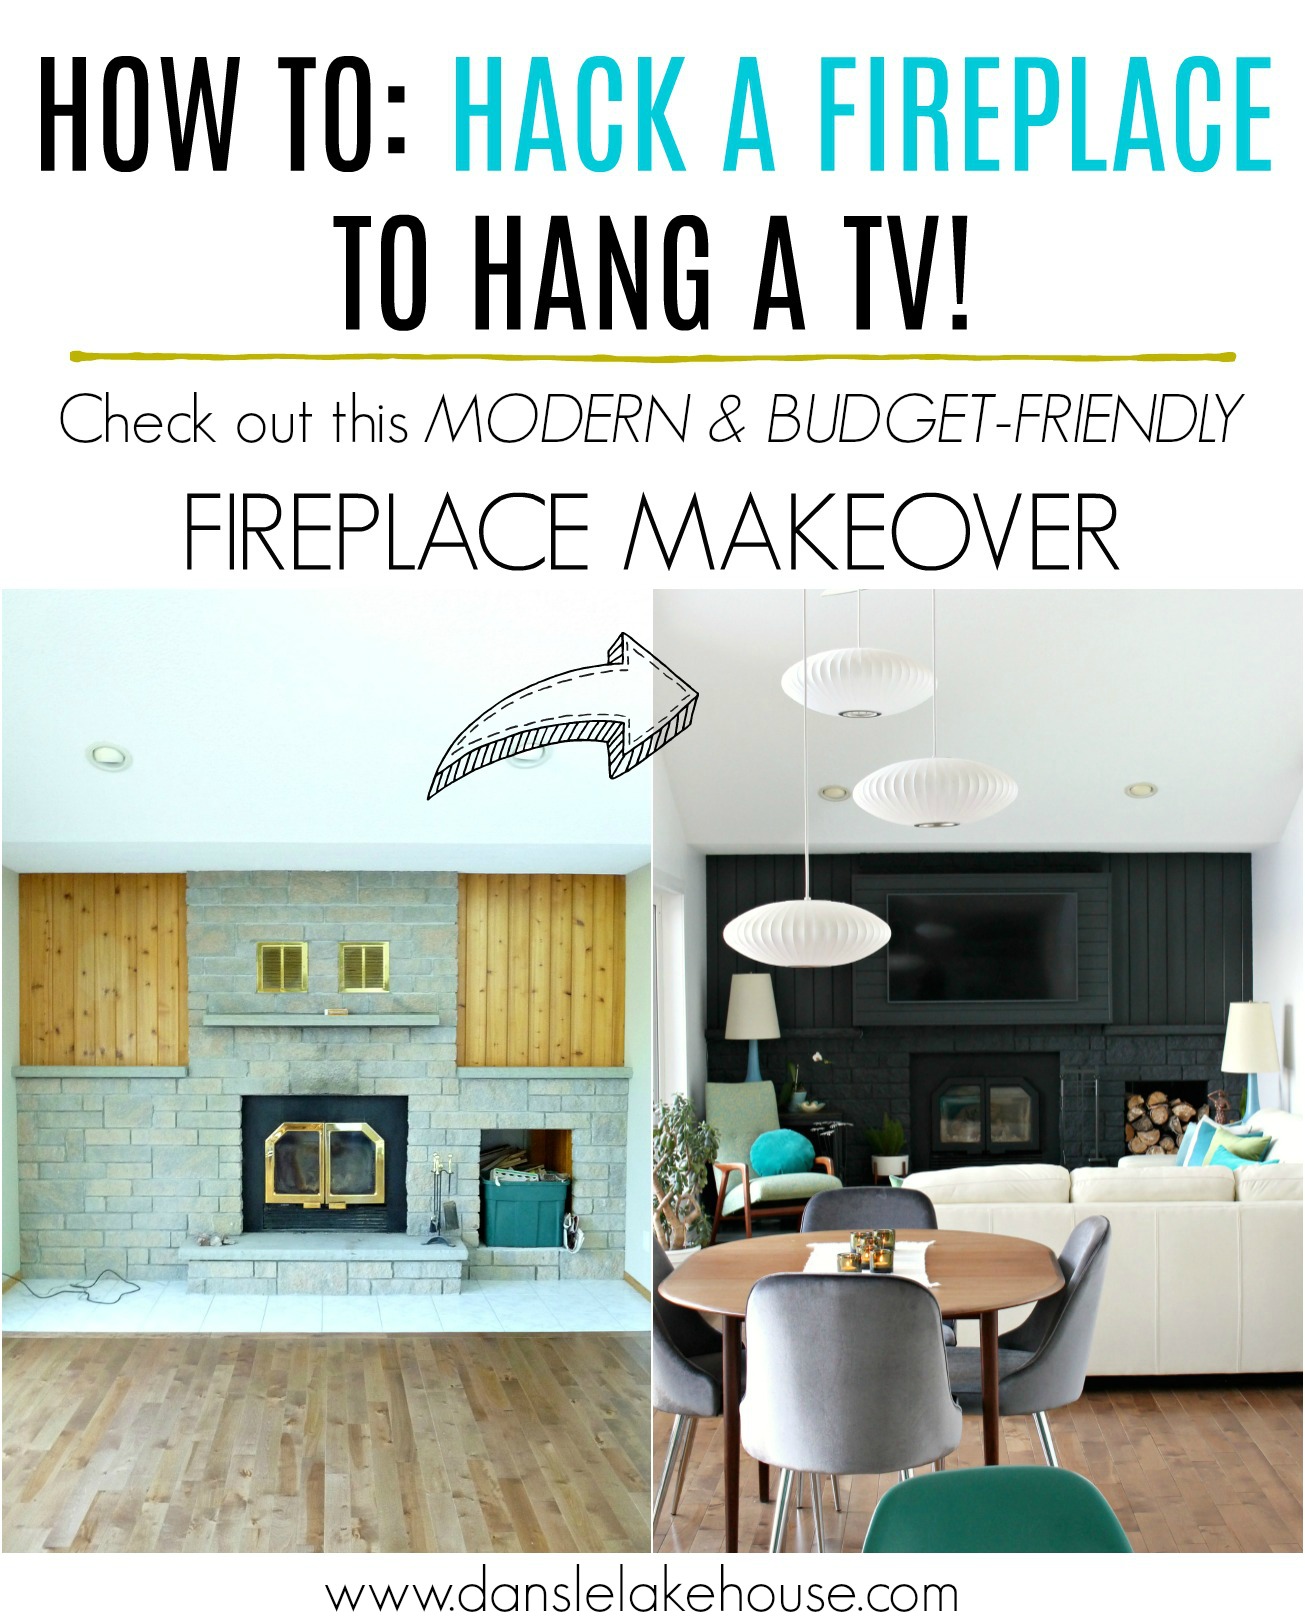 How to Build a Fireplace Bump Out to Hang a TV | DIY Fireplace Hack #fireplace #renovating #TVabovefireplace